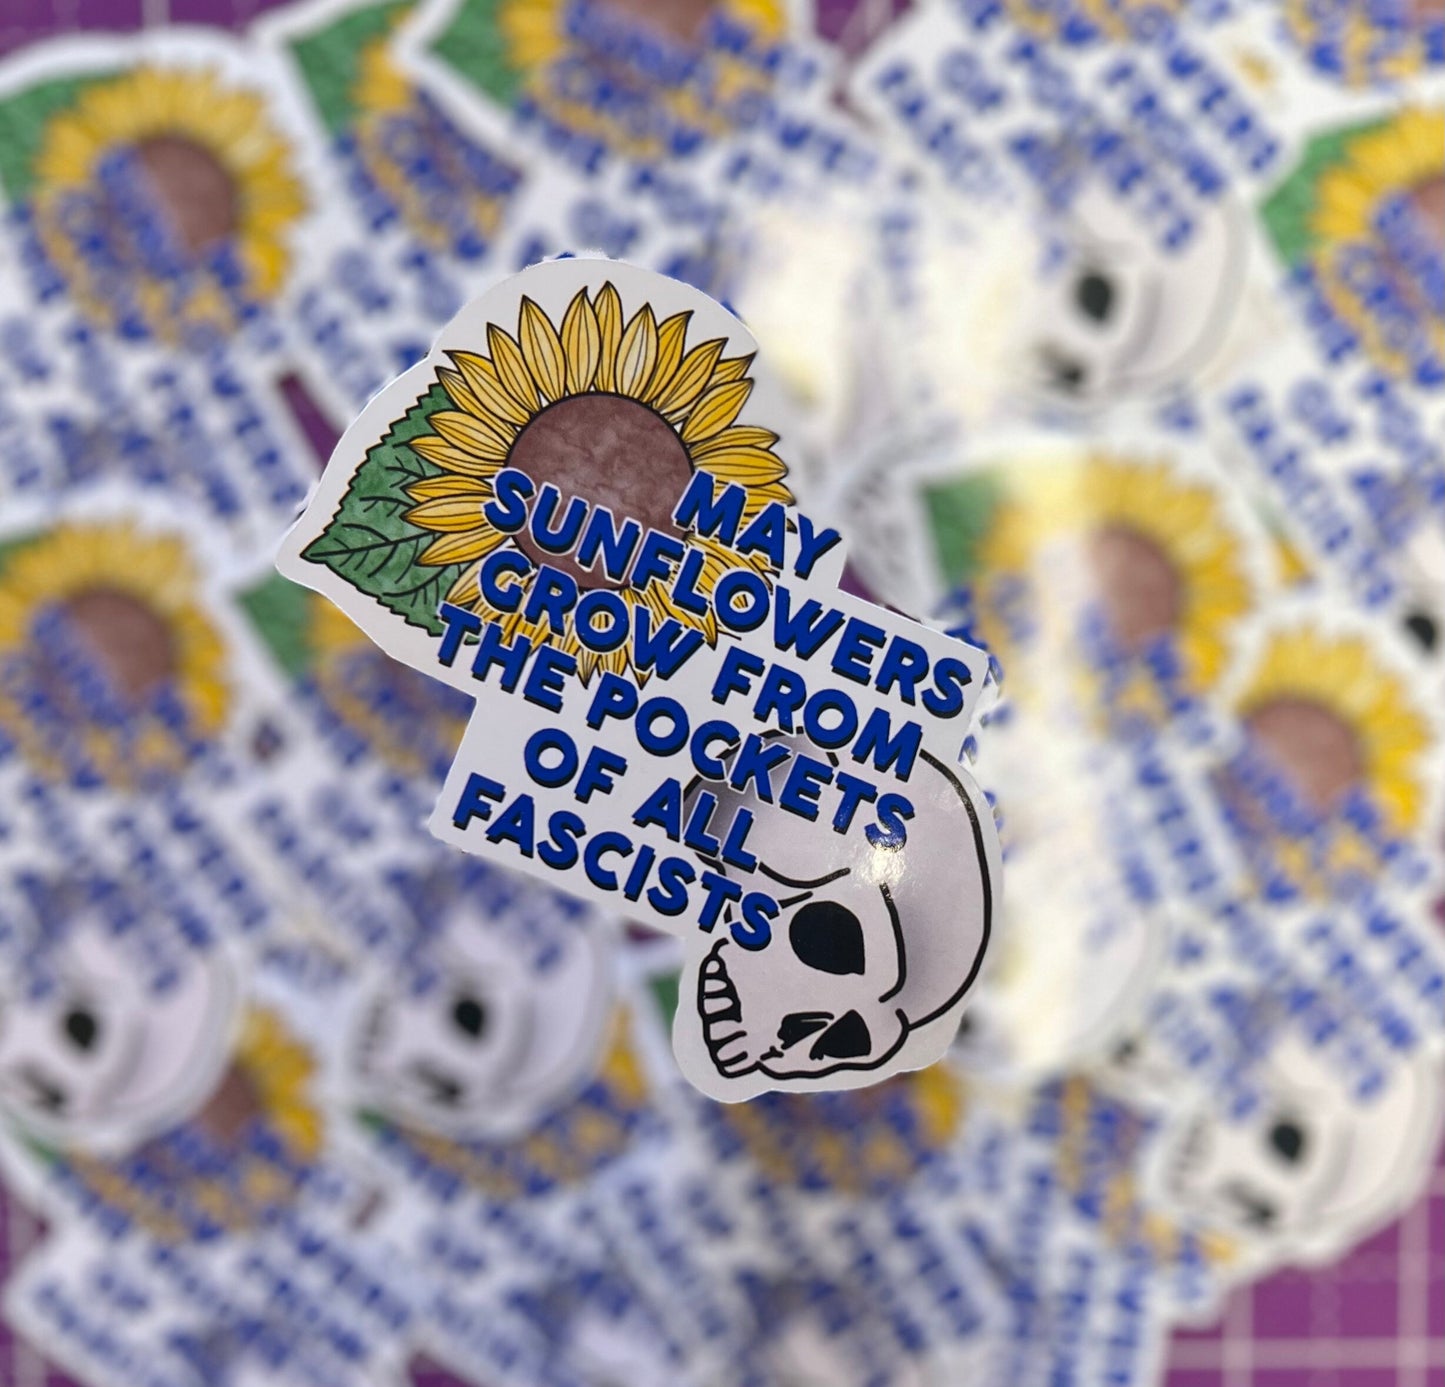 May Sunflowers Grow from the Pockets of all Fascists Sticker Ukraine Bravery